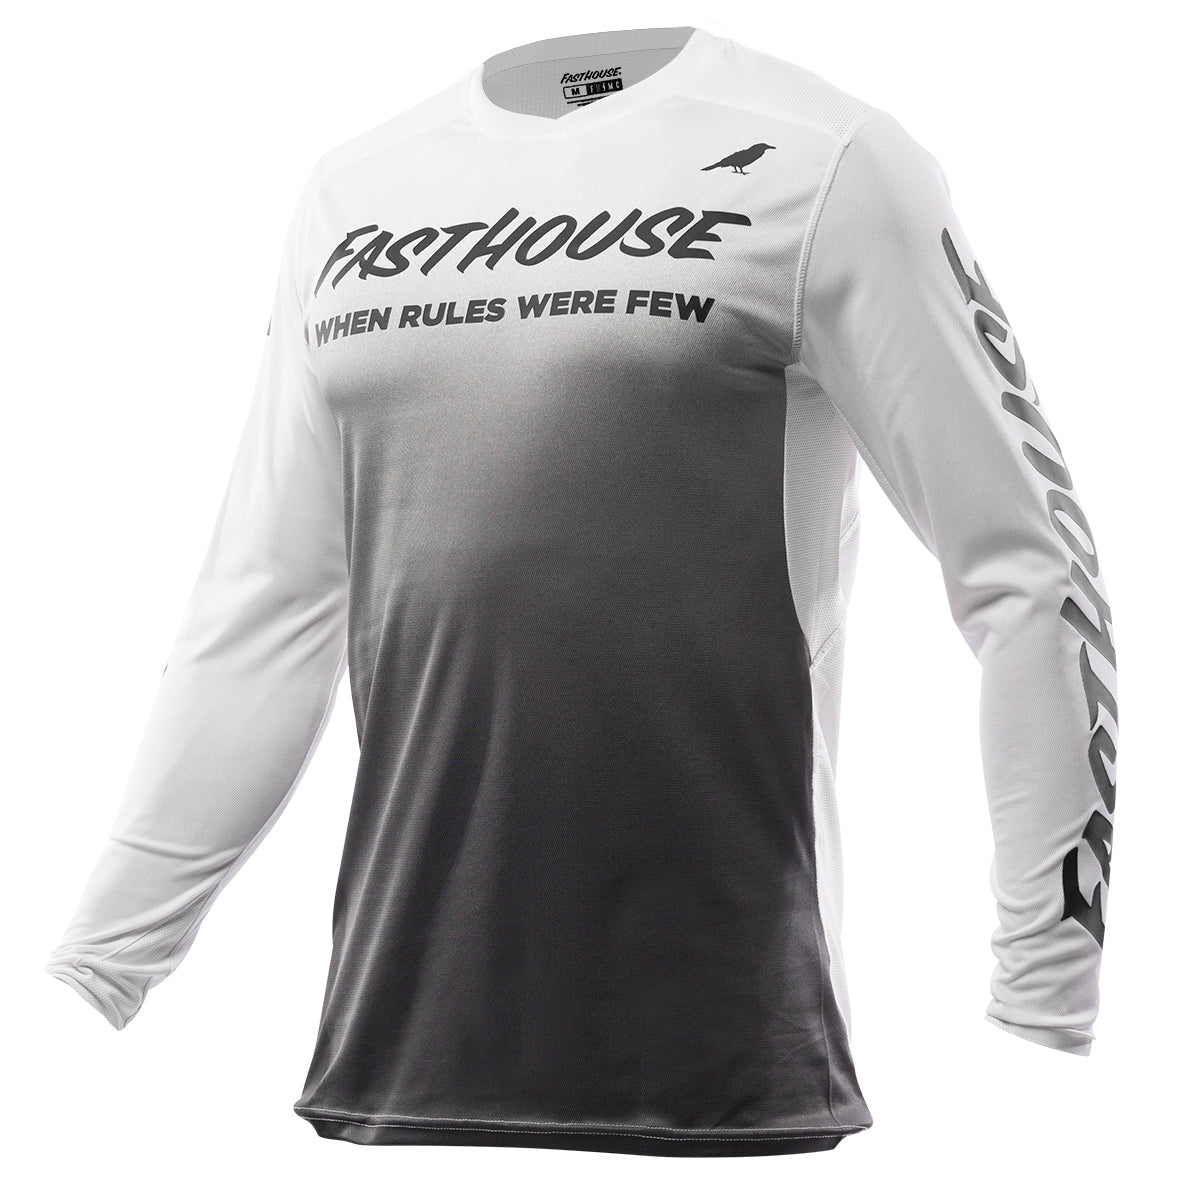 Elrod Nocturne Jersey - White/Gray